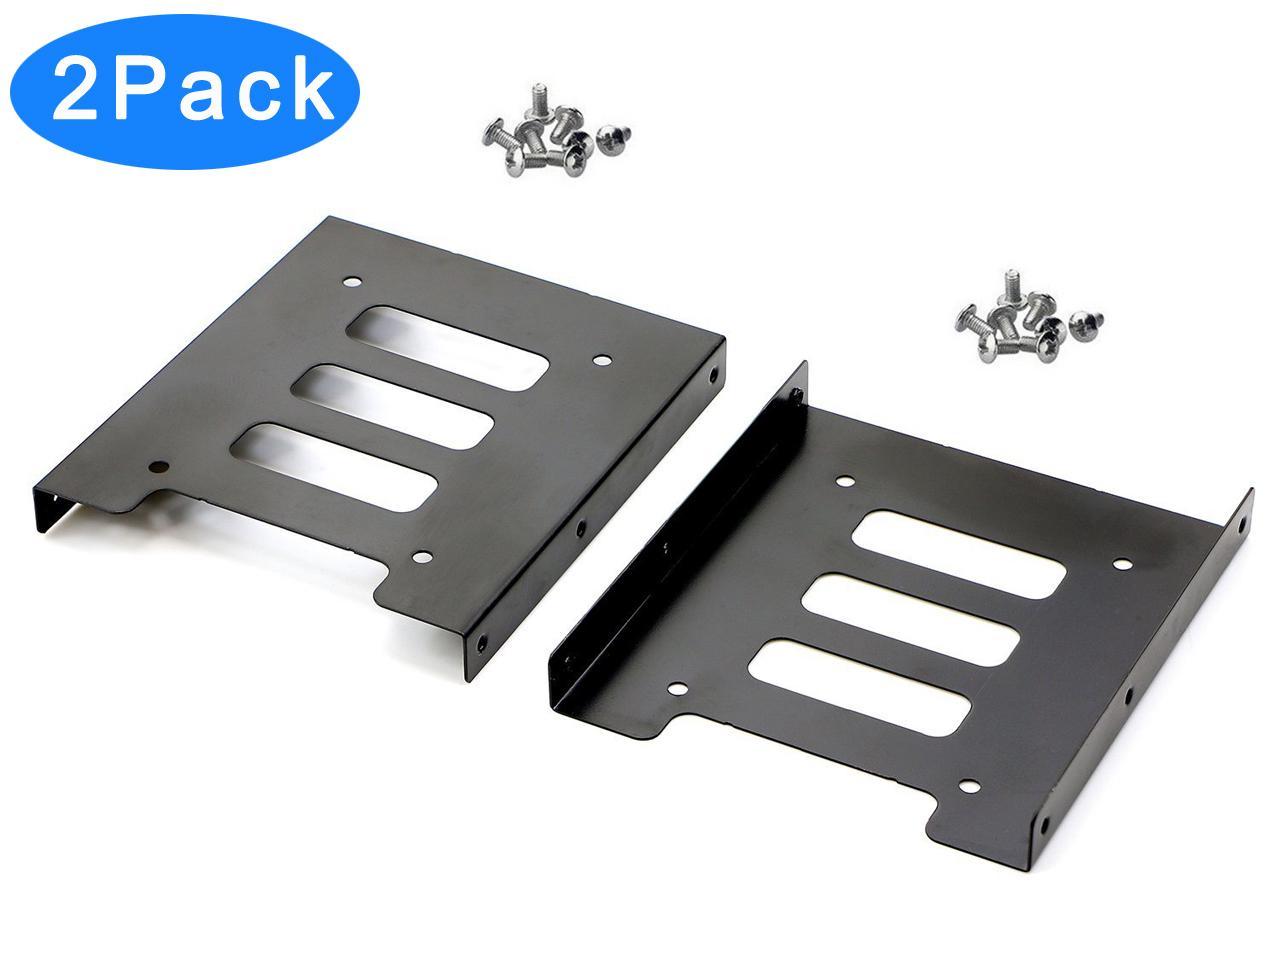 3.5" to 2.5" SSD/Hard Drive Drive Bay Adapter Mounting Bracket Converter Tray ES 